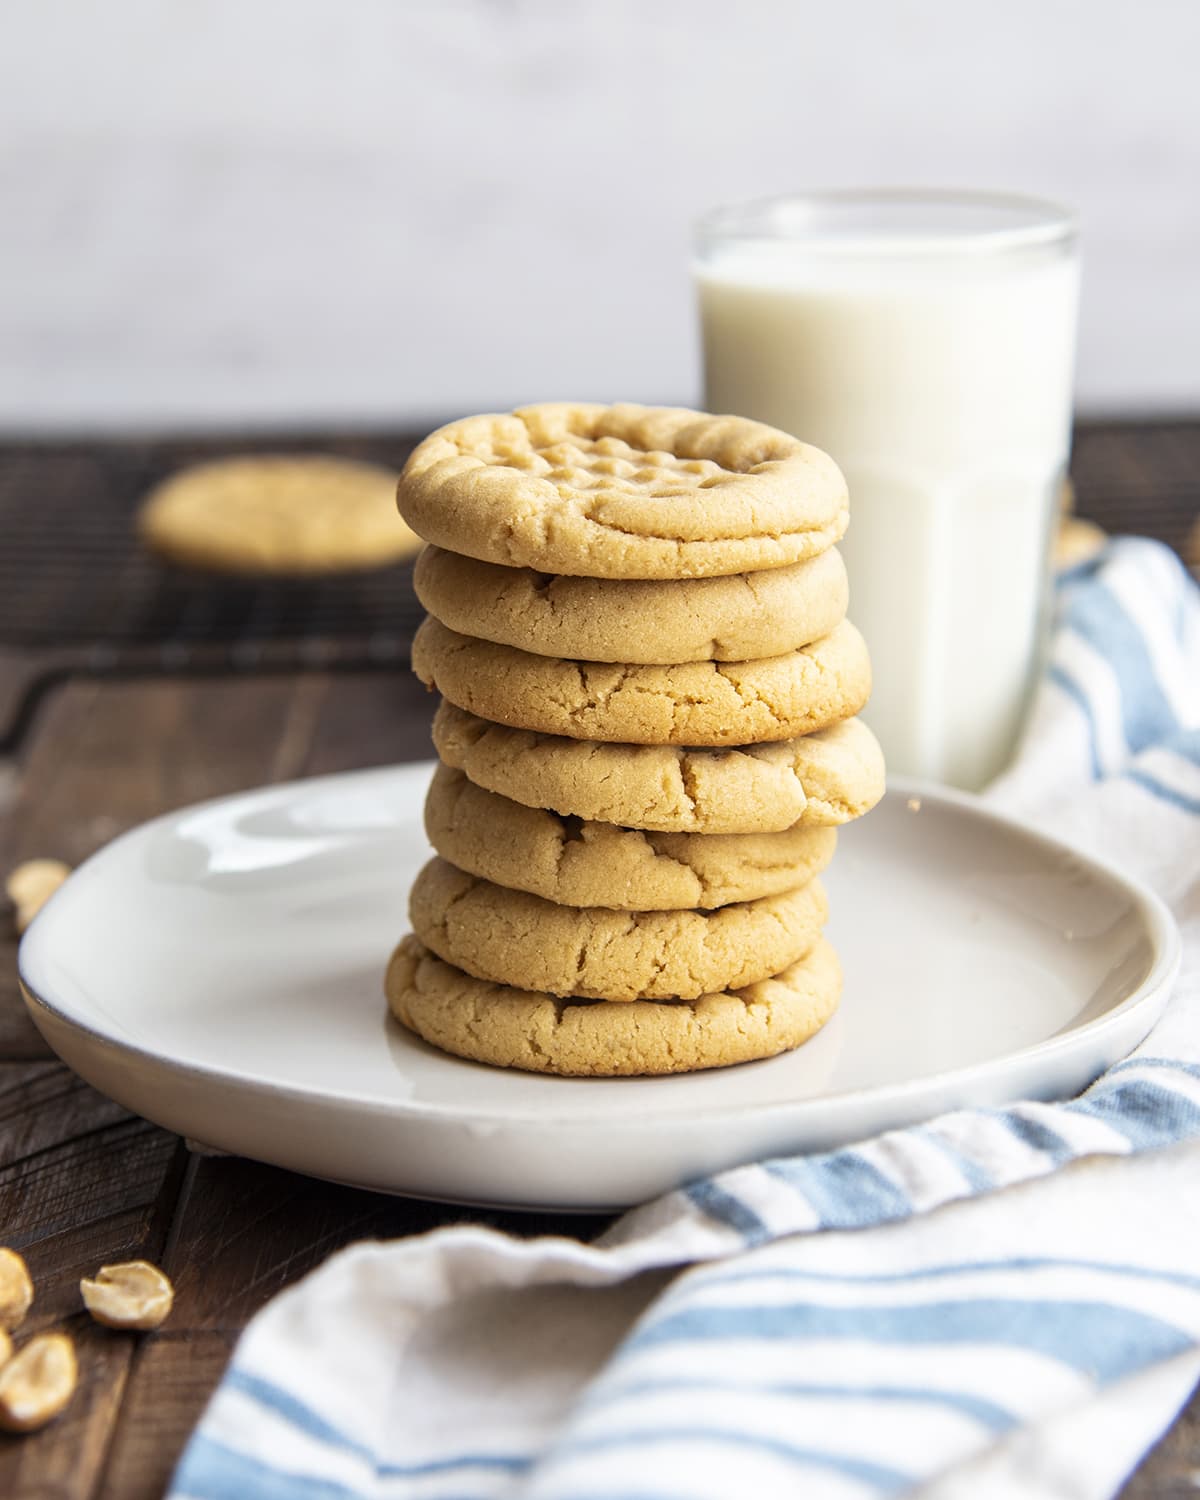 A stack of peanut butter cookies in the middle of a white plate.